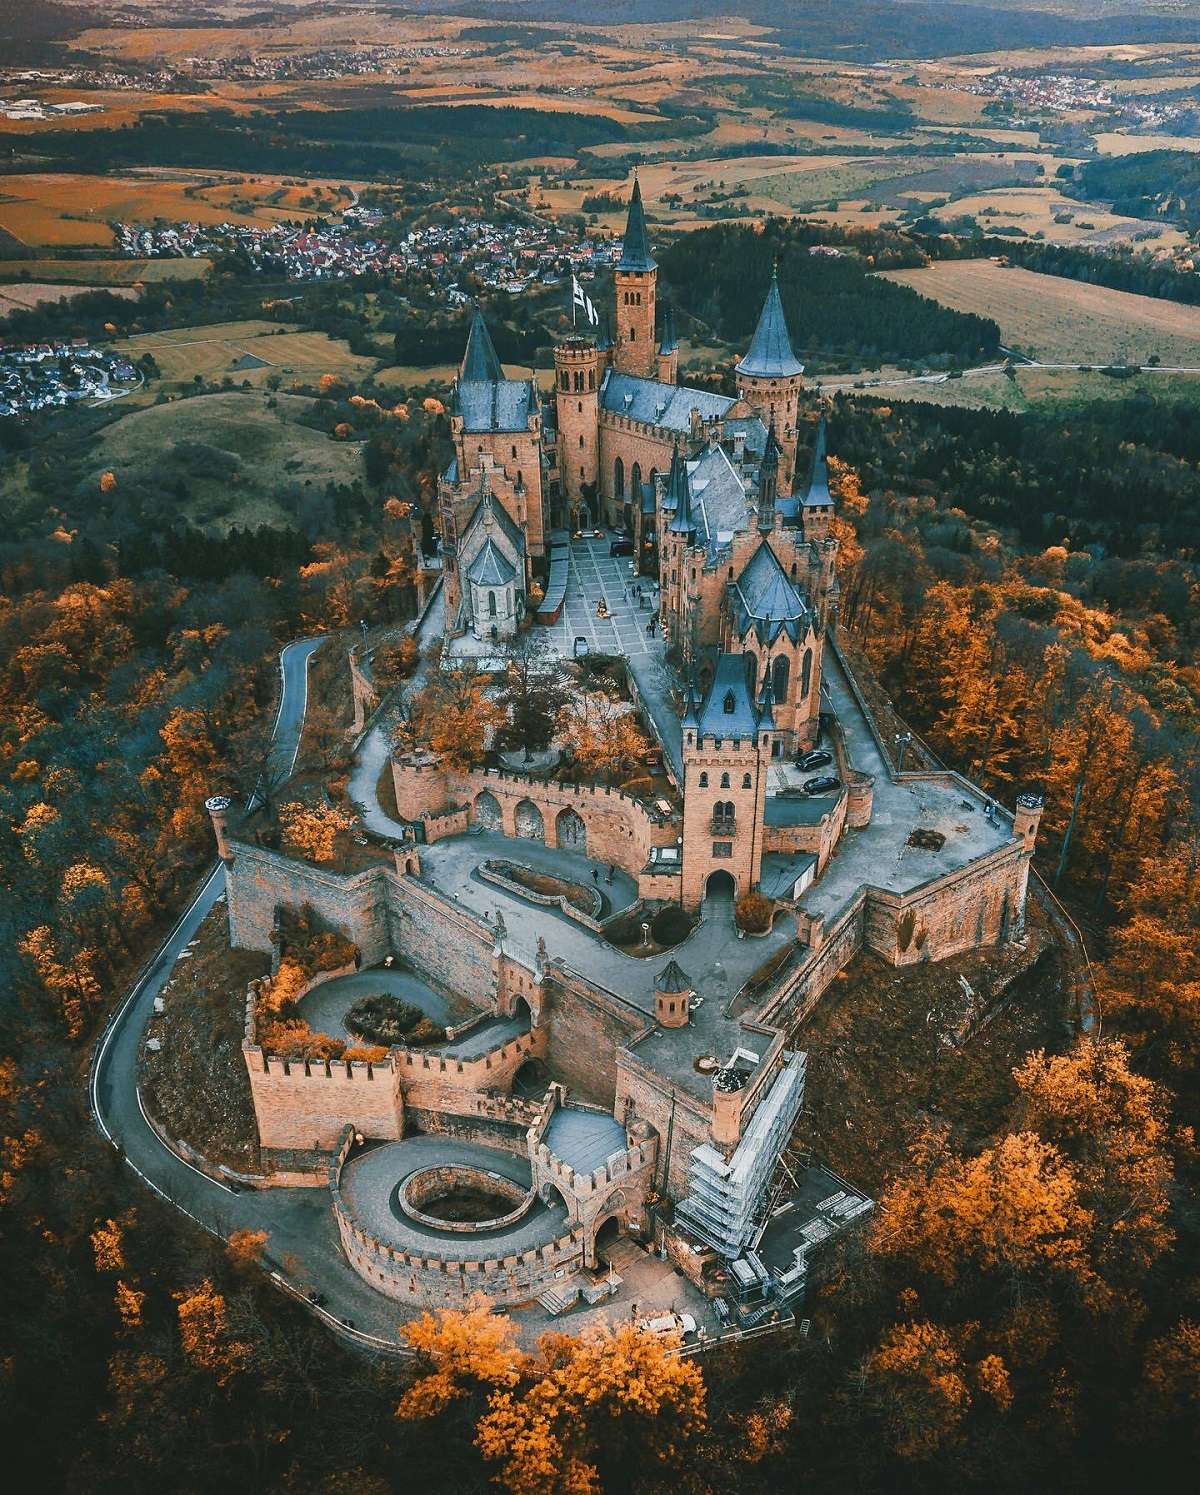 Hohenzollern Castle, The Ancestral Seat Of The Imperial House Of Hohenzollern, Was Built On A Hilltop Overlooking The Autumn Forest And The Villages Beyond, Bisingen, Baden-Württemberg, Germany